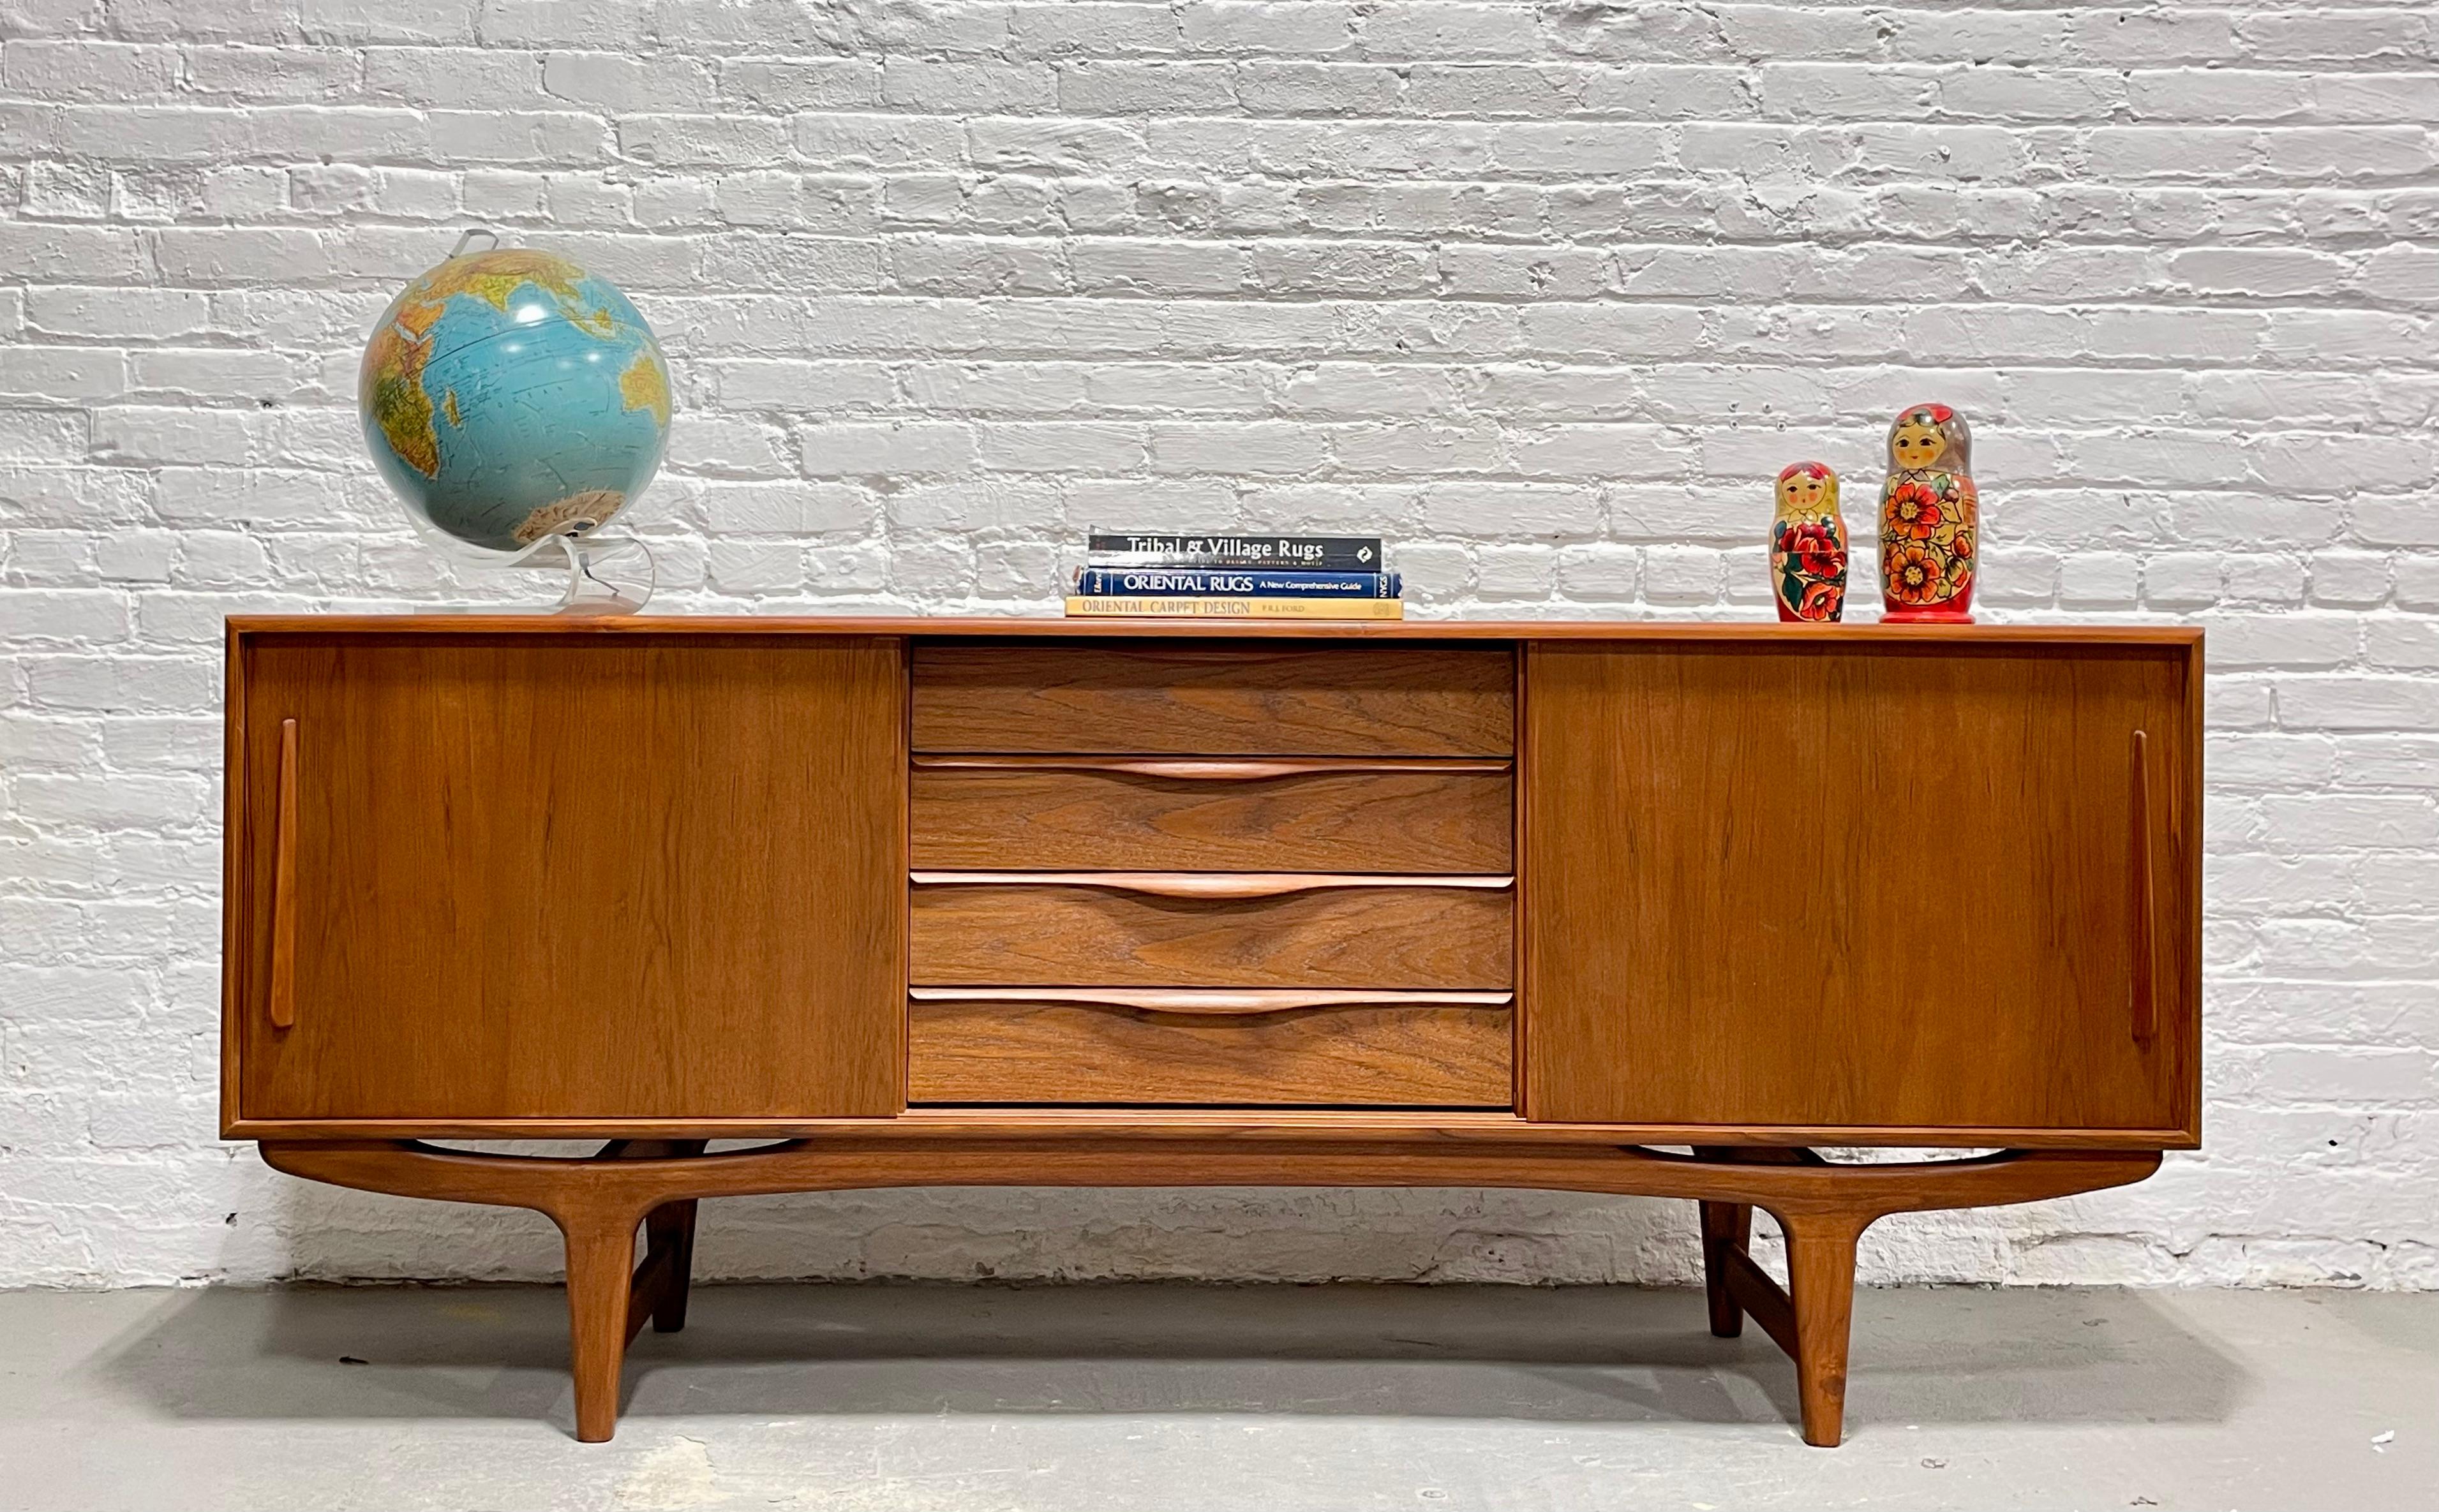 Long + Sculpted Mid Century Modern styled credenza / media stand featuring sculptural hand pulls and leg design. Excellent layout for a media stand - generous shelving for components paired with streamlined drawers for remotes, dvds and other